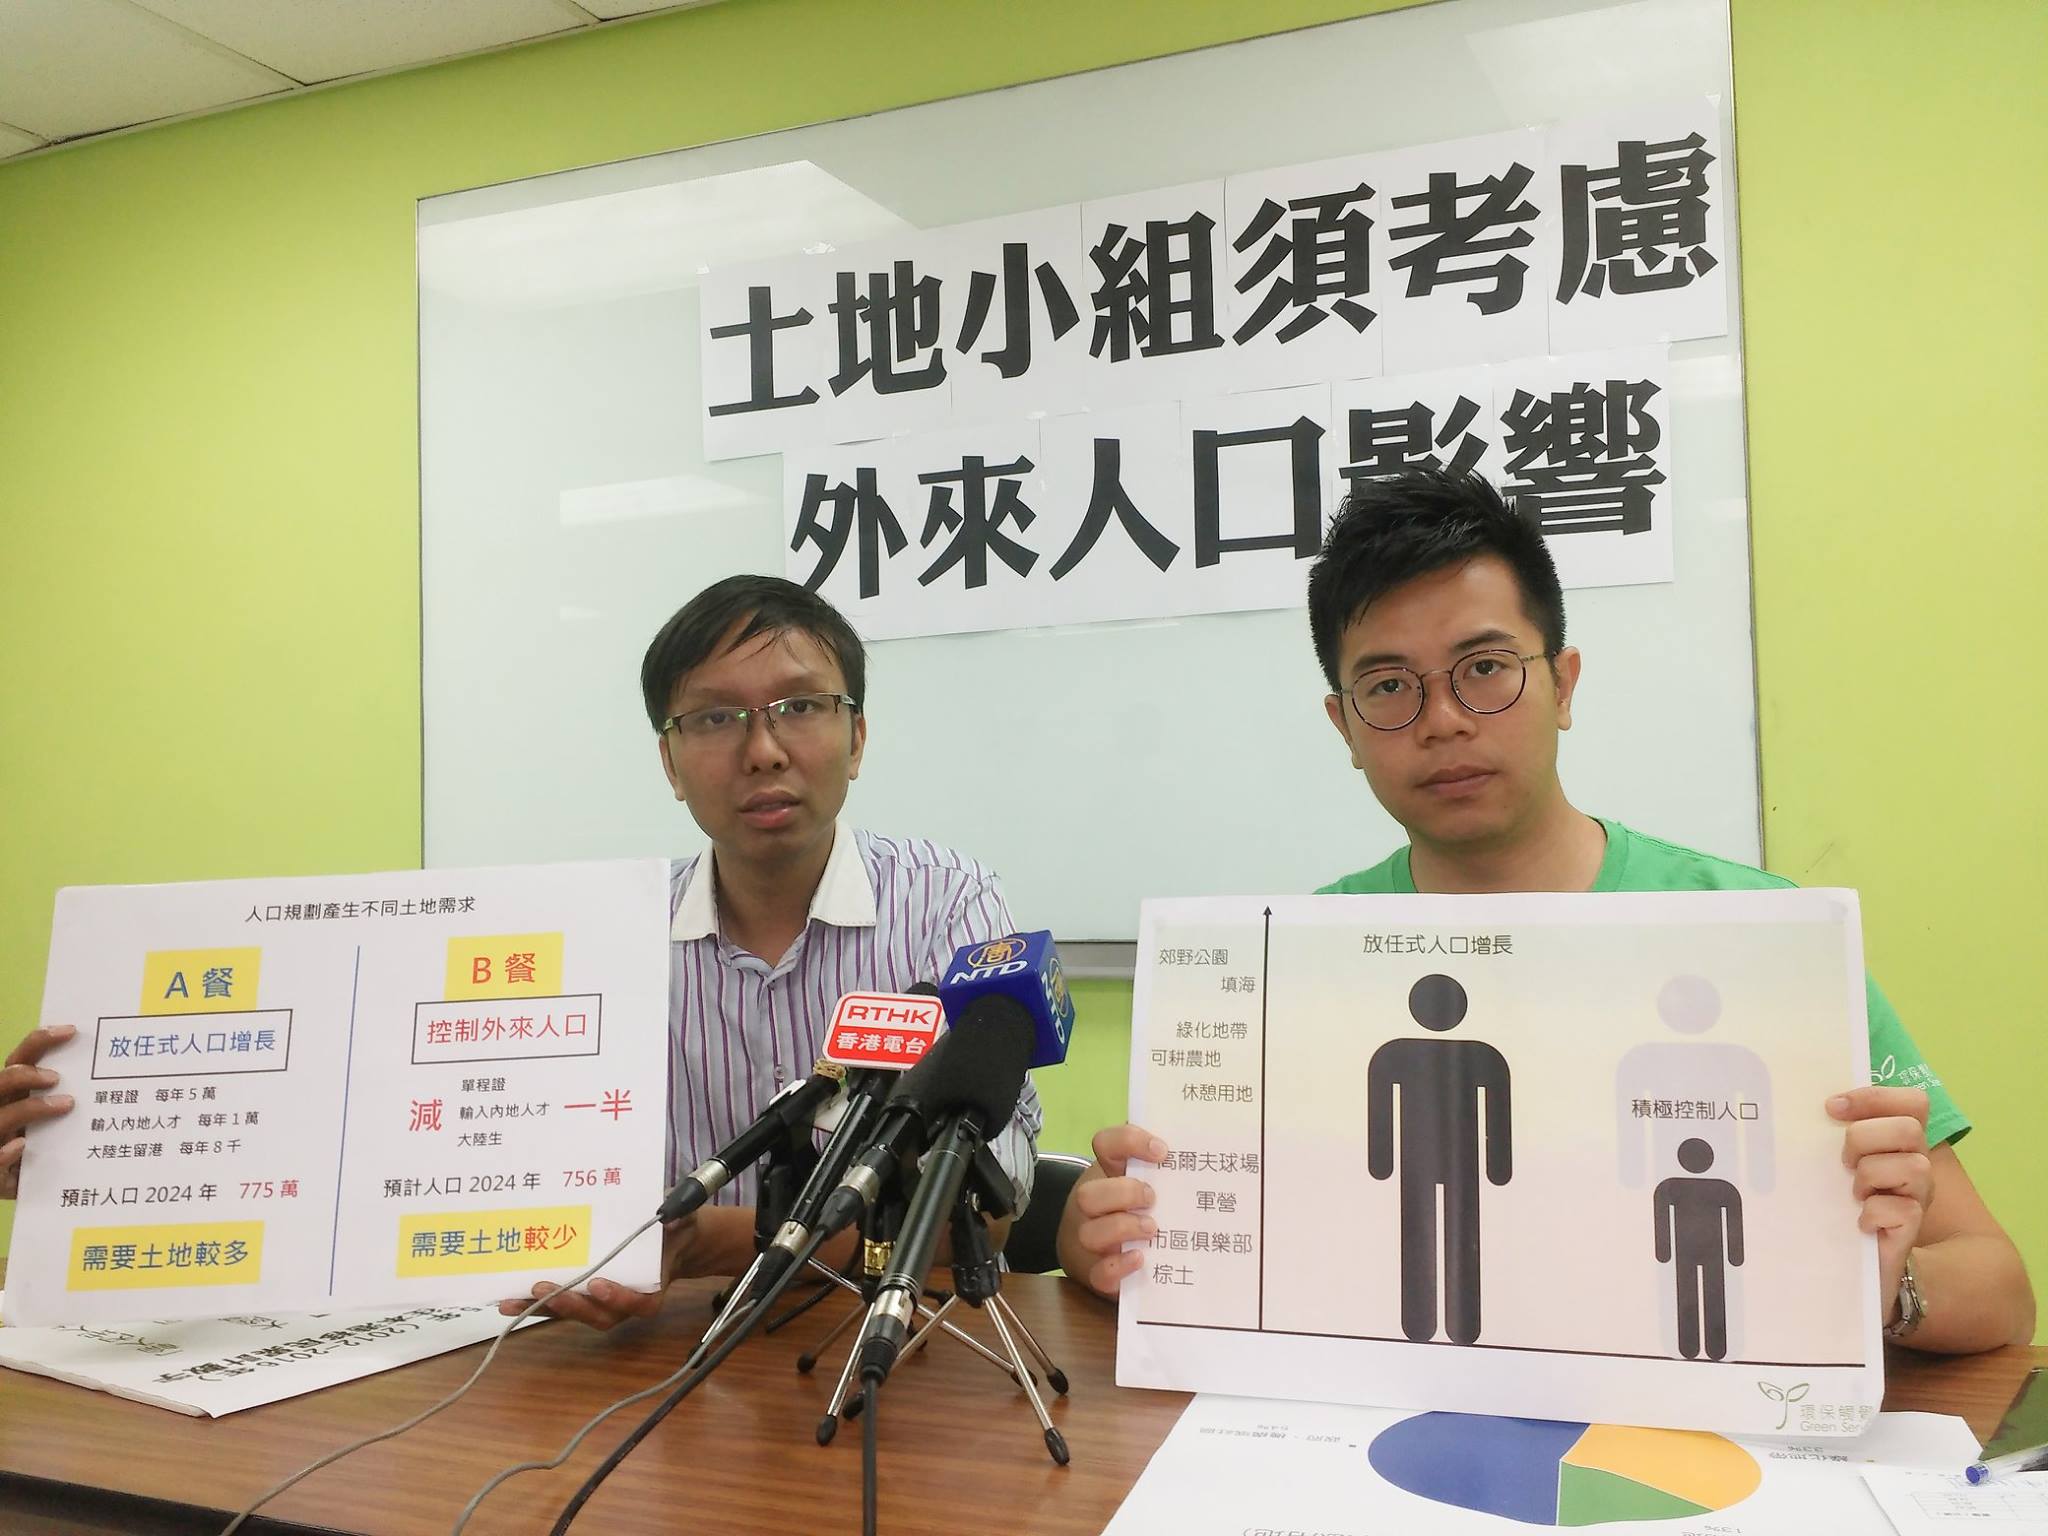 Green Sense claims population growth from mainland immigrants has hindered the government’s land push. Photo: Green Sense/Facebook